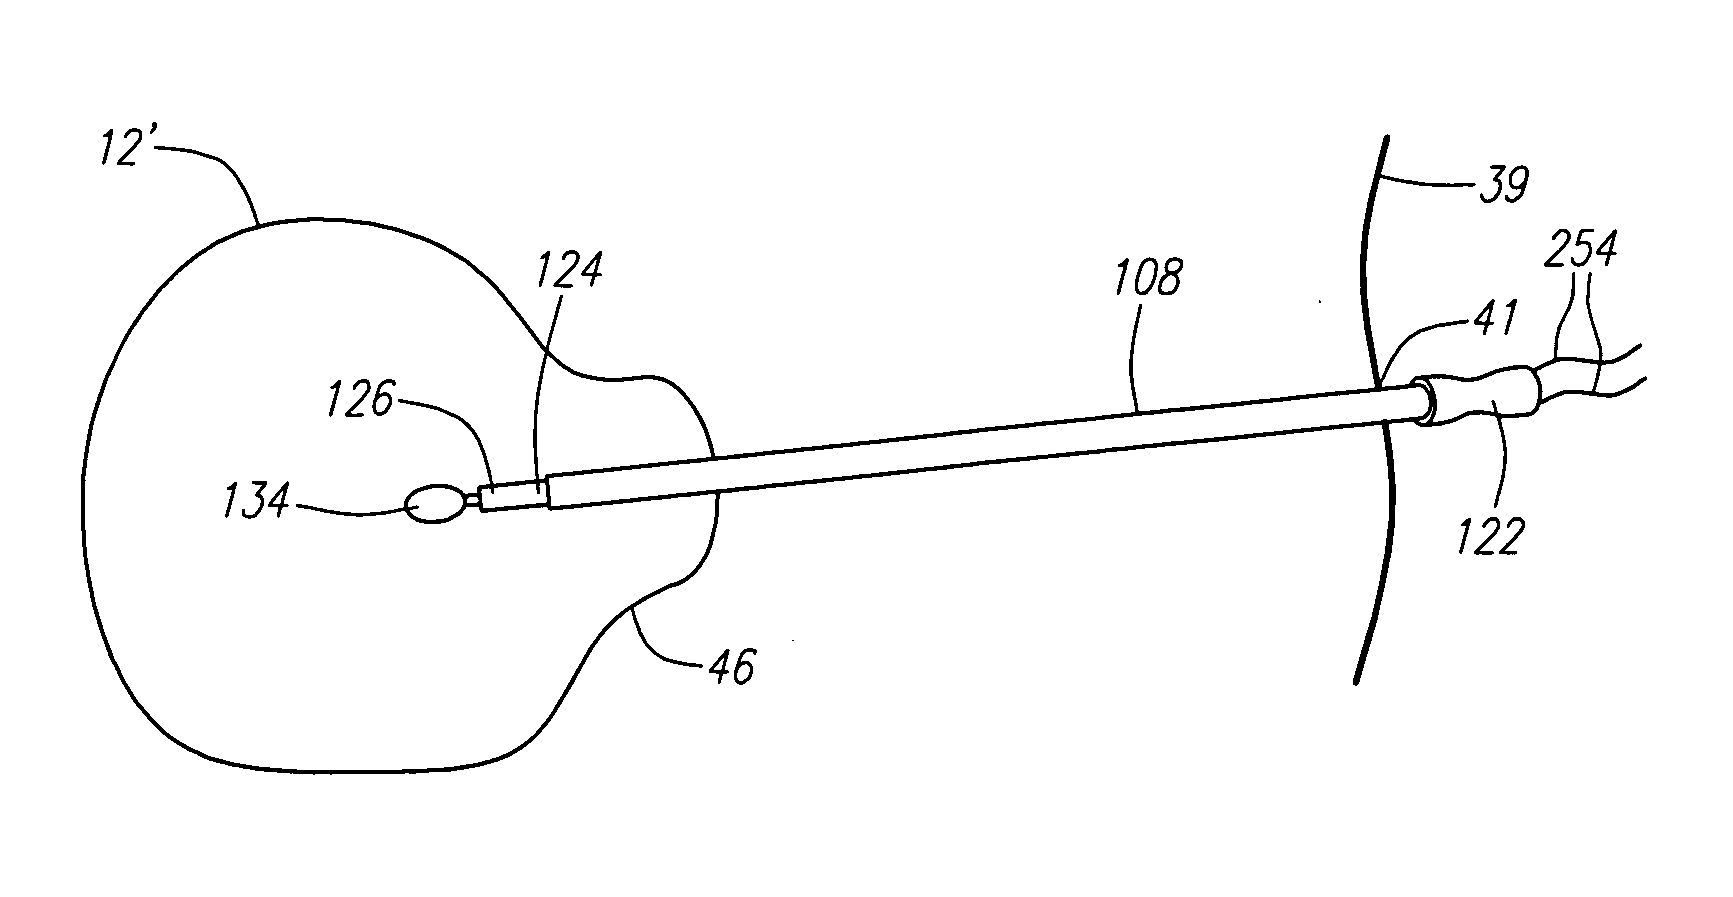 Apparatus and methods for removing vertebral bone and disc tissue